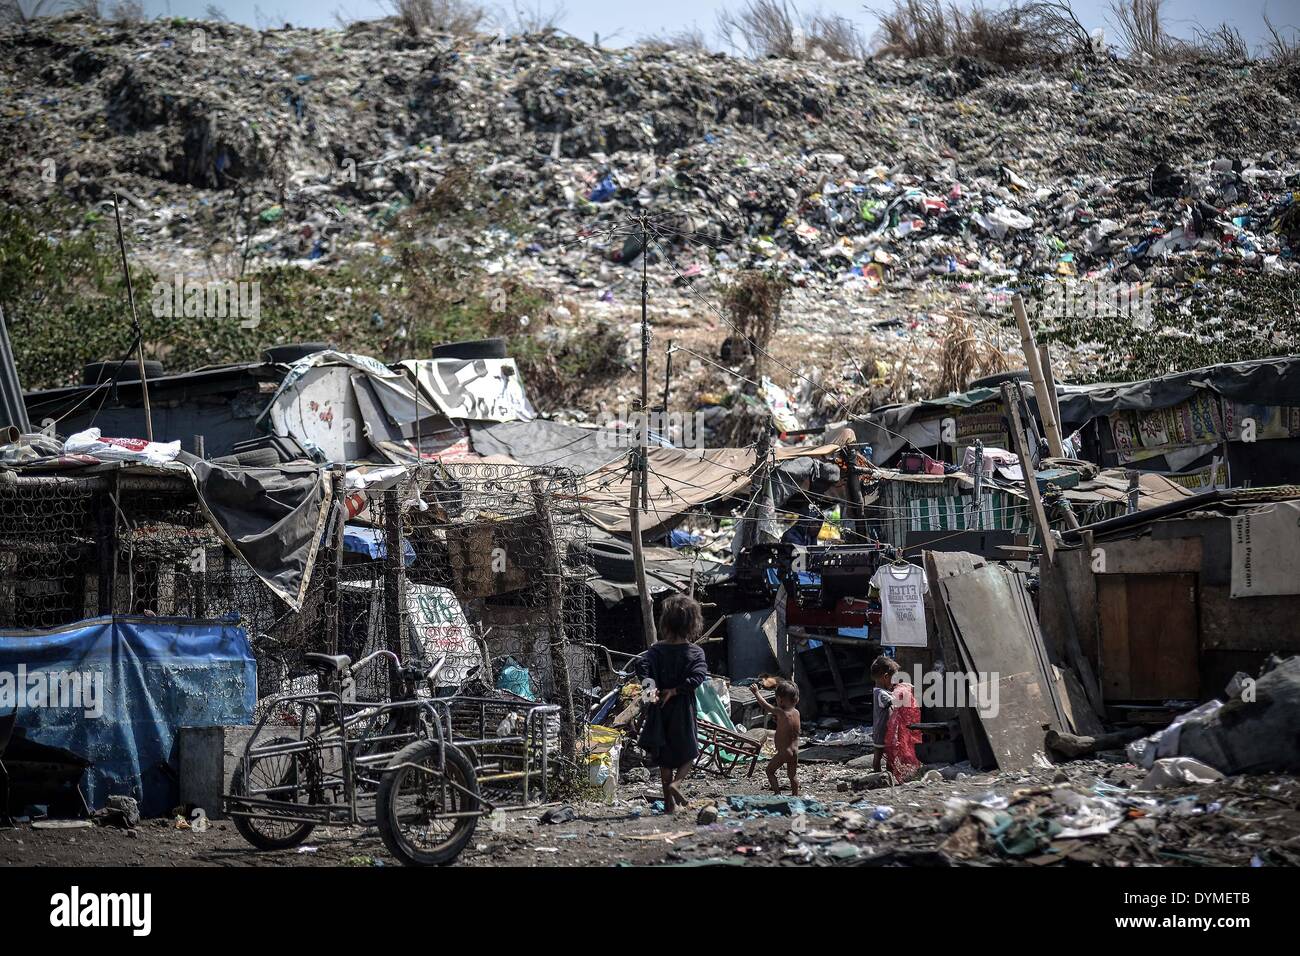 Las Pinas, Philippines. 22nd Apr, 2014. Makeshift houses are seen at a  garbage dumpsite during Earth Day in Las Pinas, south of Manila, Philippines,  April 22, 2014. The world marks Earth Day